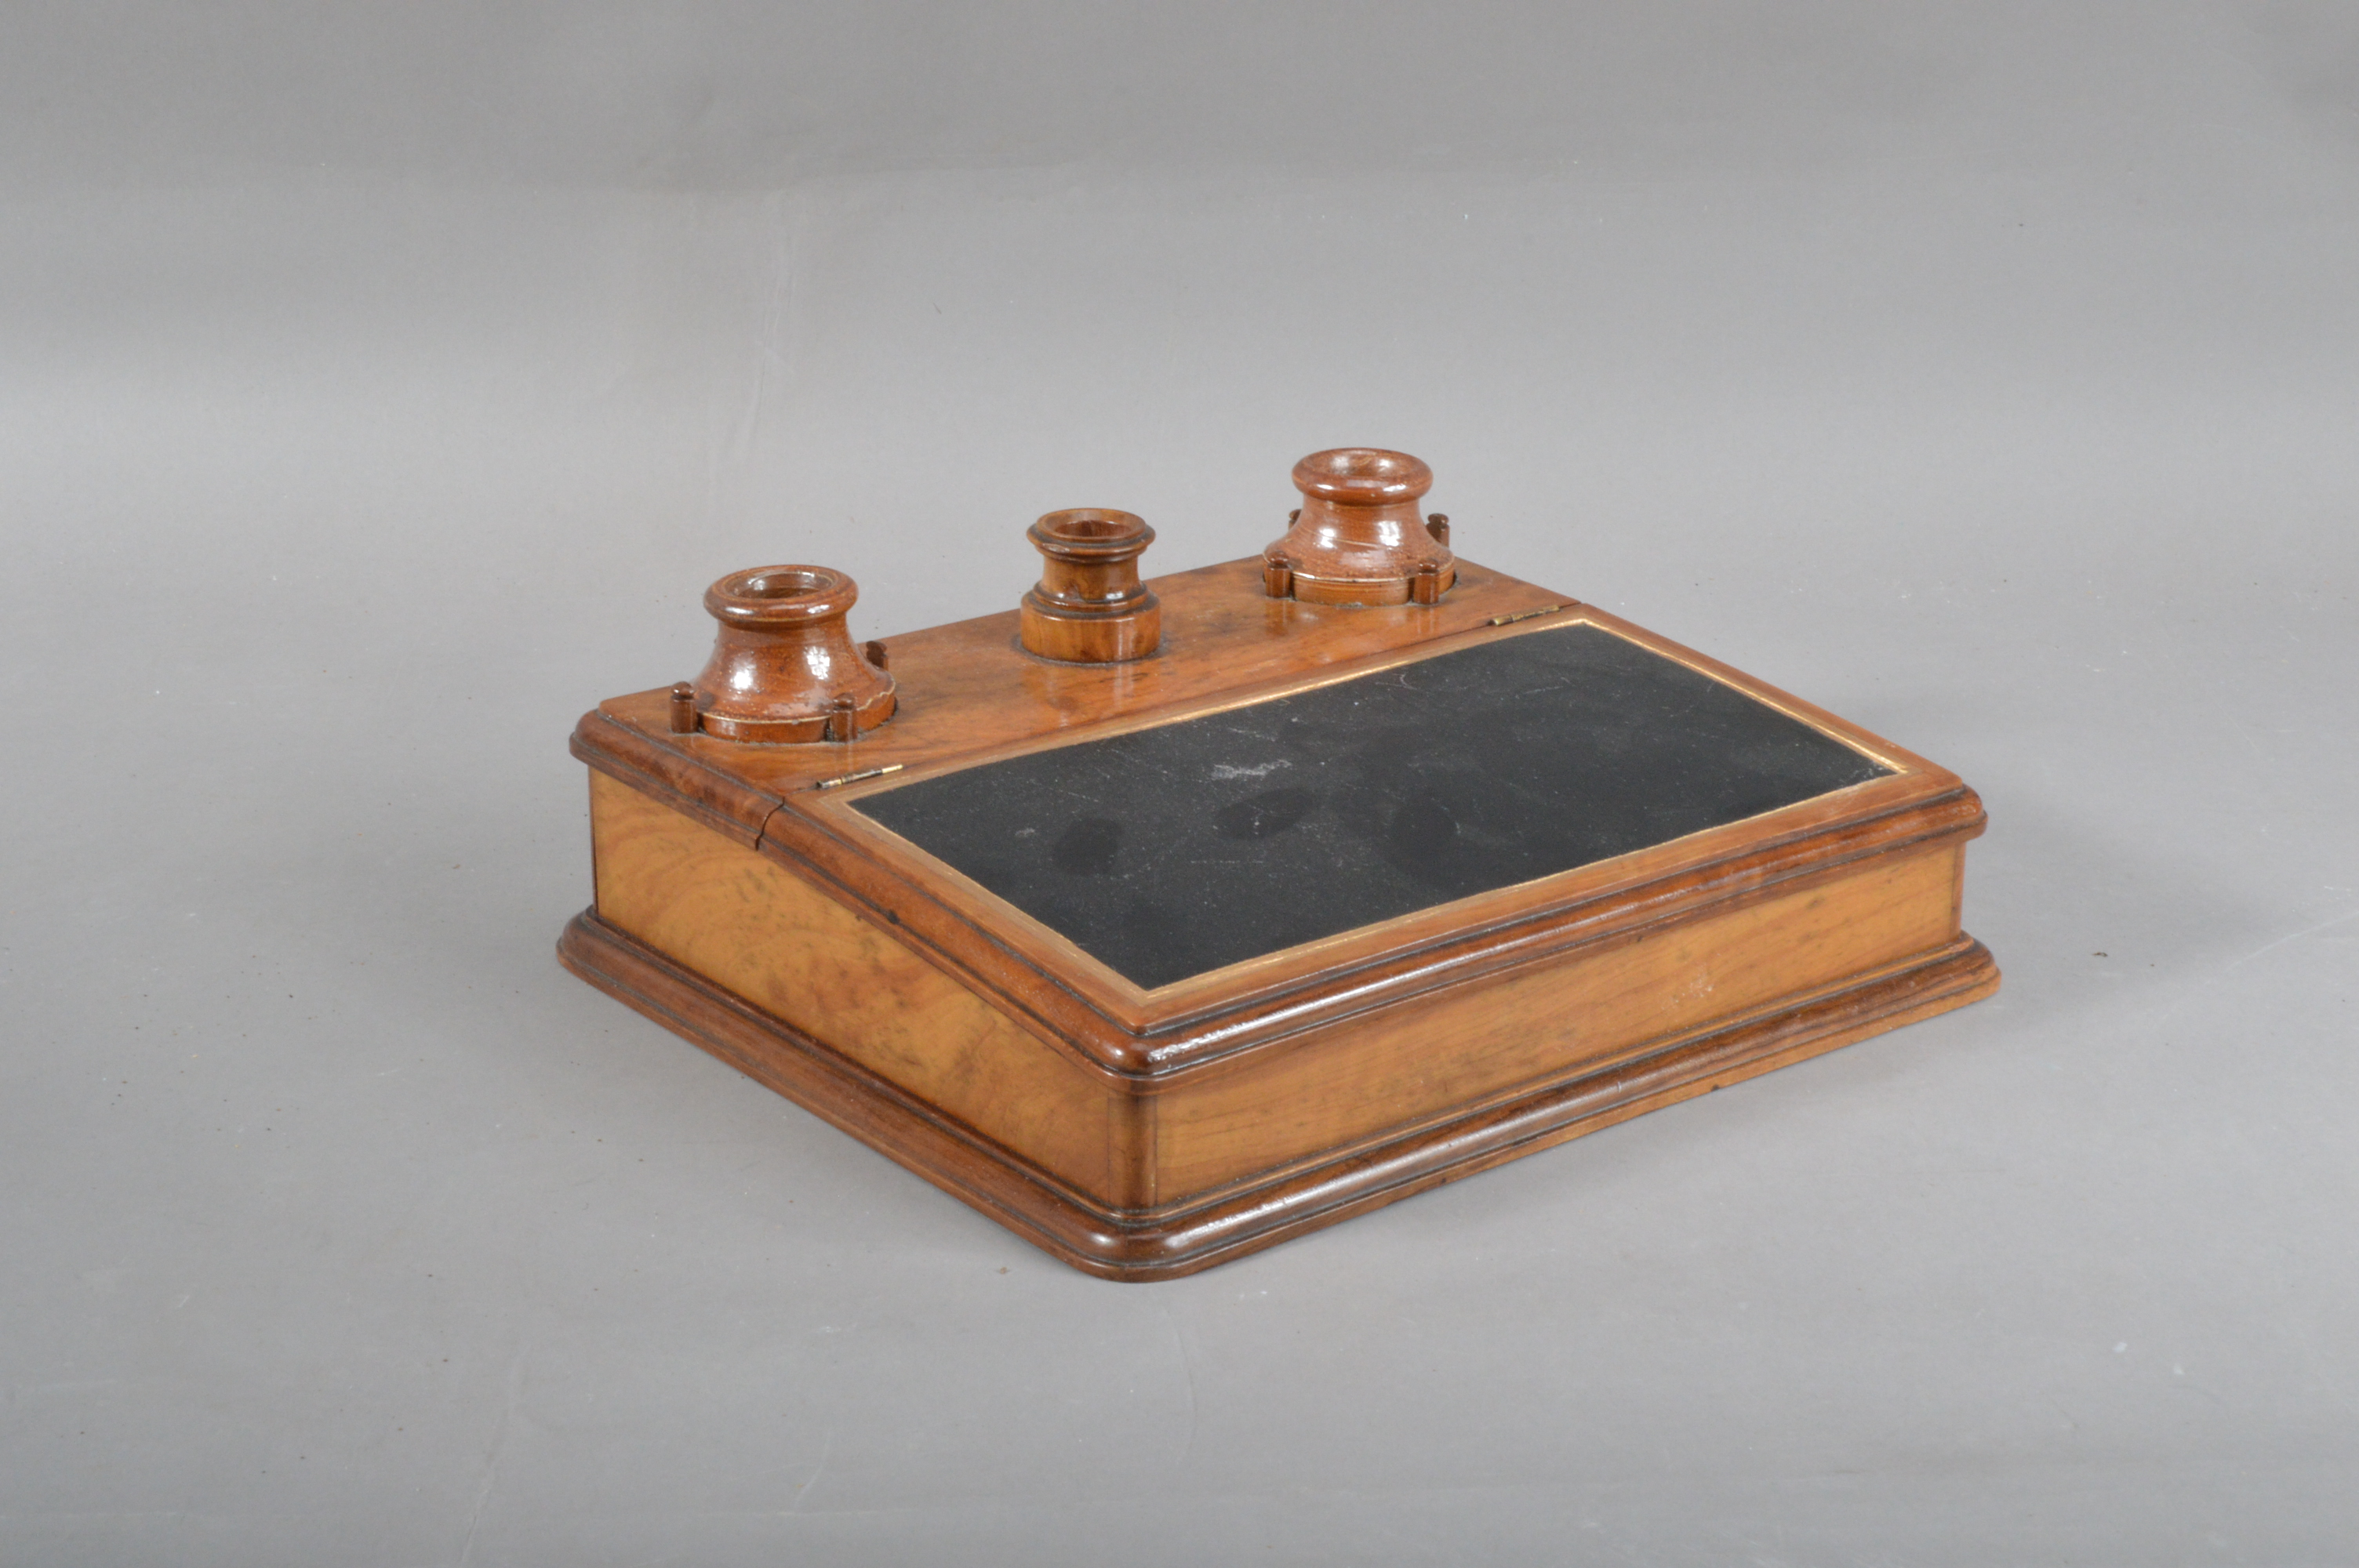 A 19th century olivewood and stoneware inkwell, two removable stoneware inkwells with a central